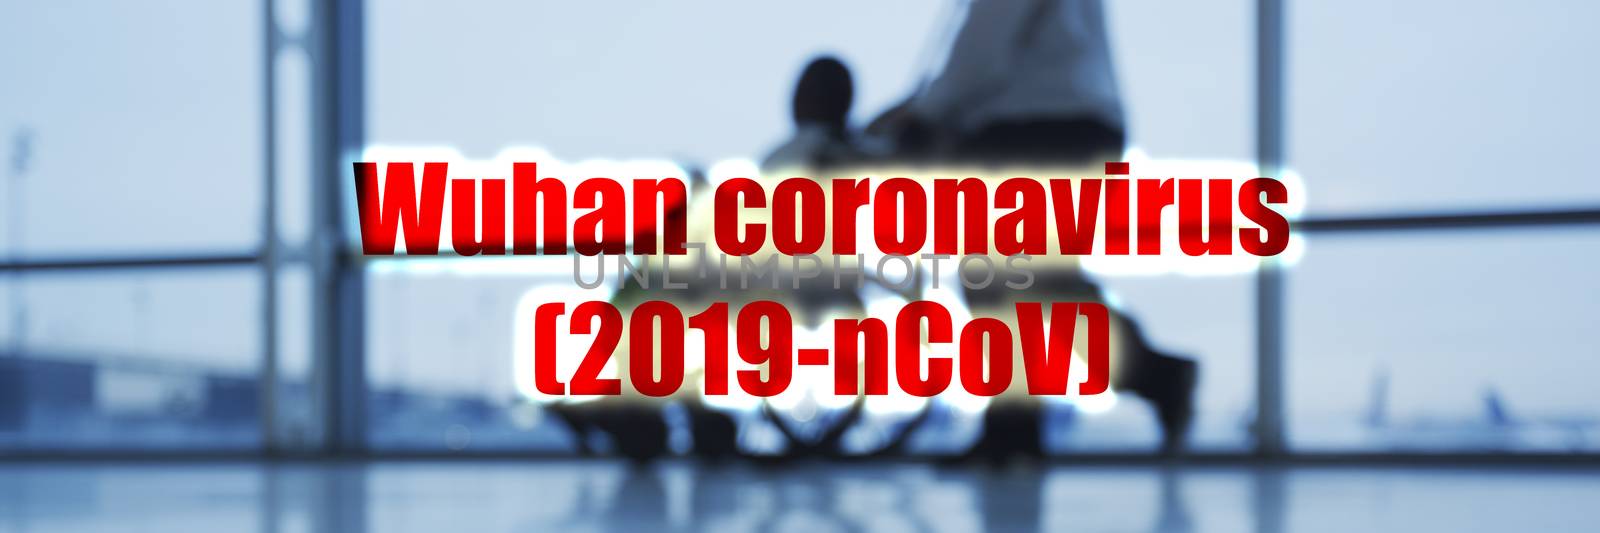 Wuhan coronavirus 2019 nCov banner background travel airport people or hospital health emergency person on wheelchair being transported in a hurry by Maridav